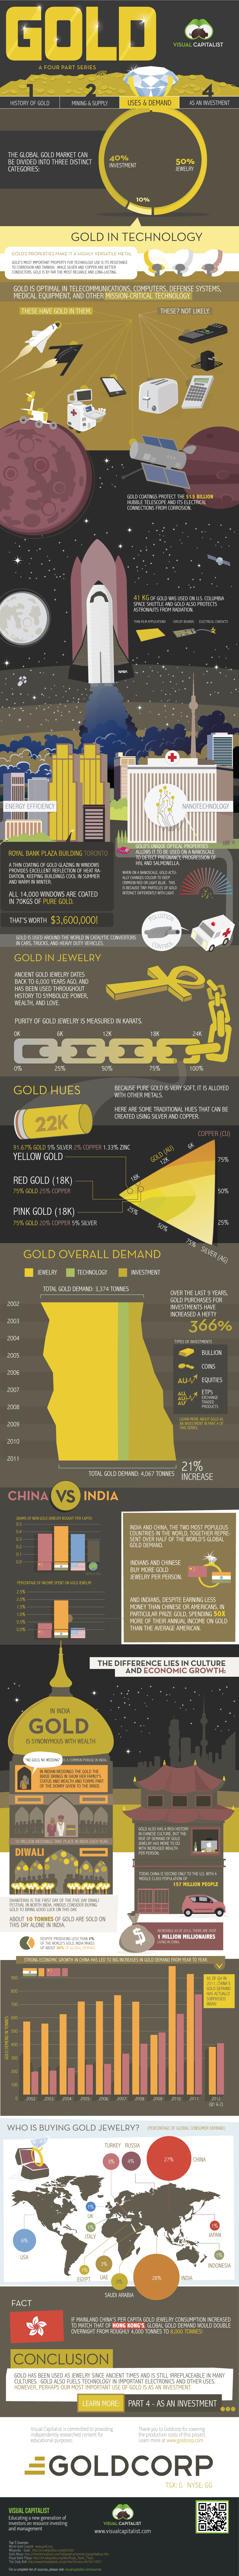 Uses of Gold In technology